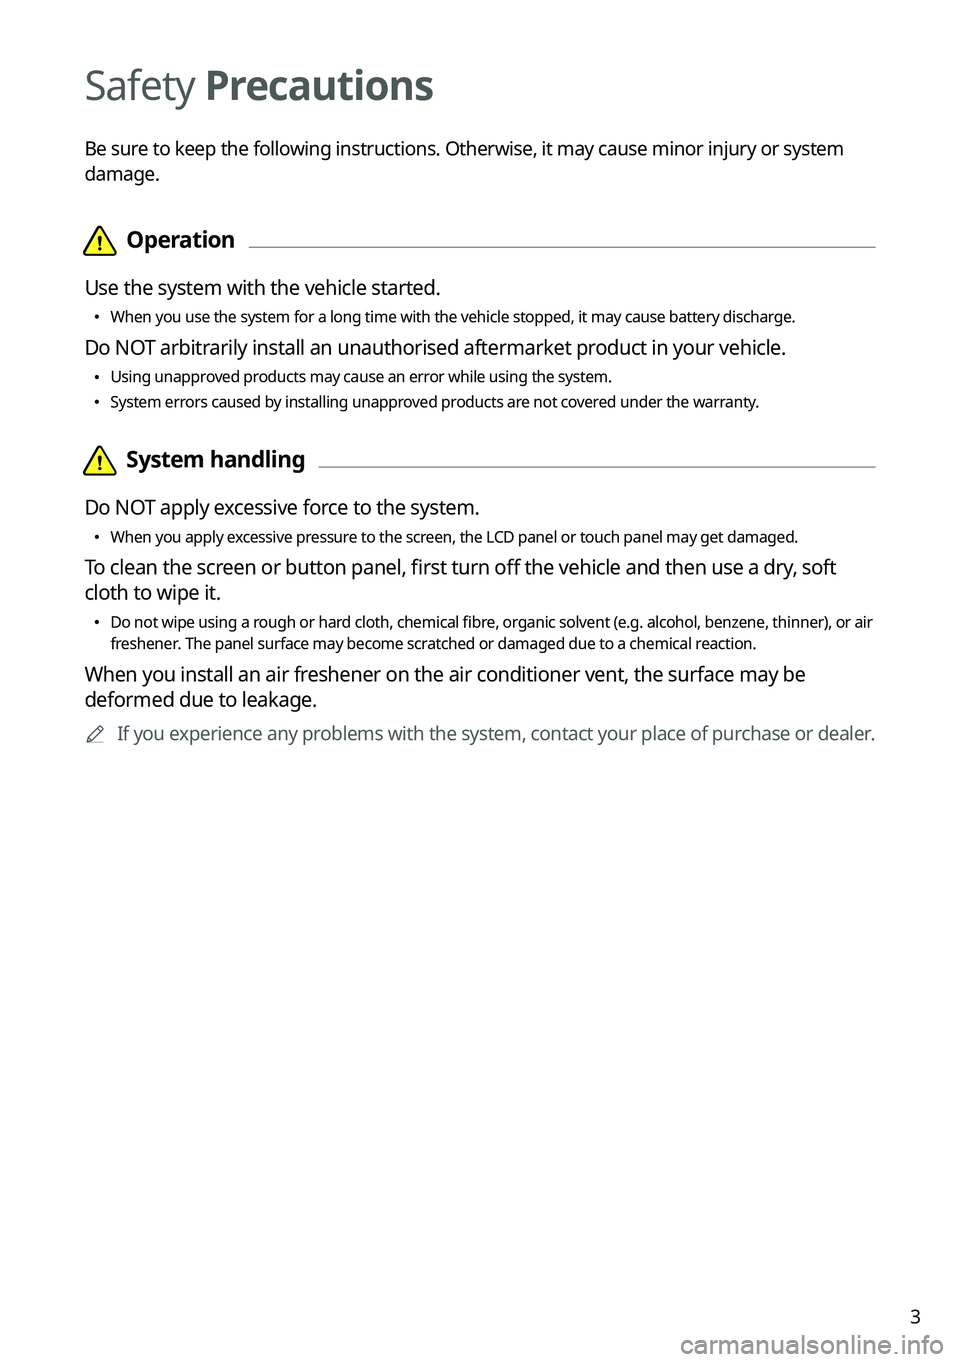 KIA SORENTO 2022  Navigation System Quick Reference Guide 3
Safety Precautions
Be sure to keep the following instructions. Otherwise, it may cause minor injury or system 
damage. 
  \334\334Operation
Use the system with the vehicle started.
 \225
When you us